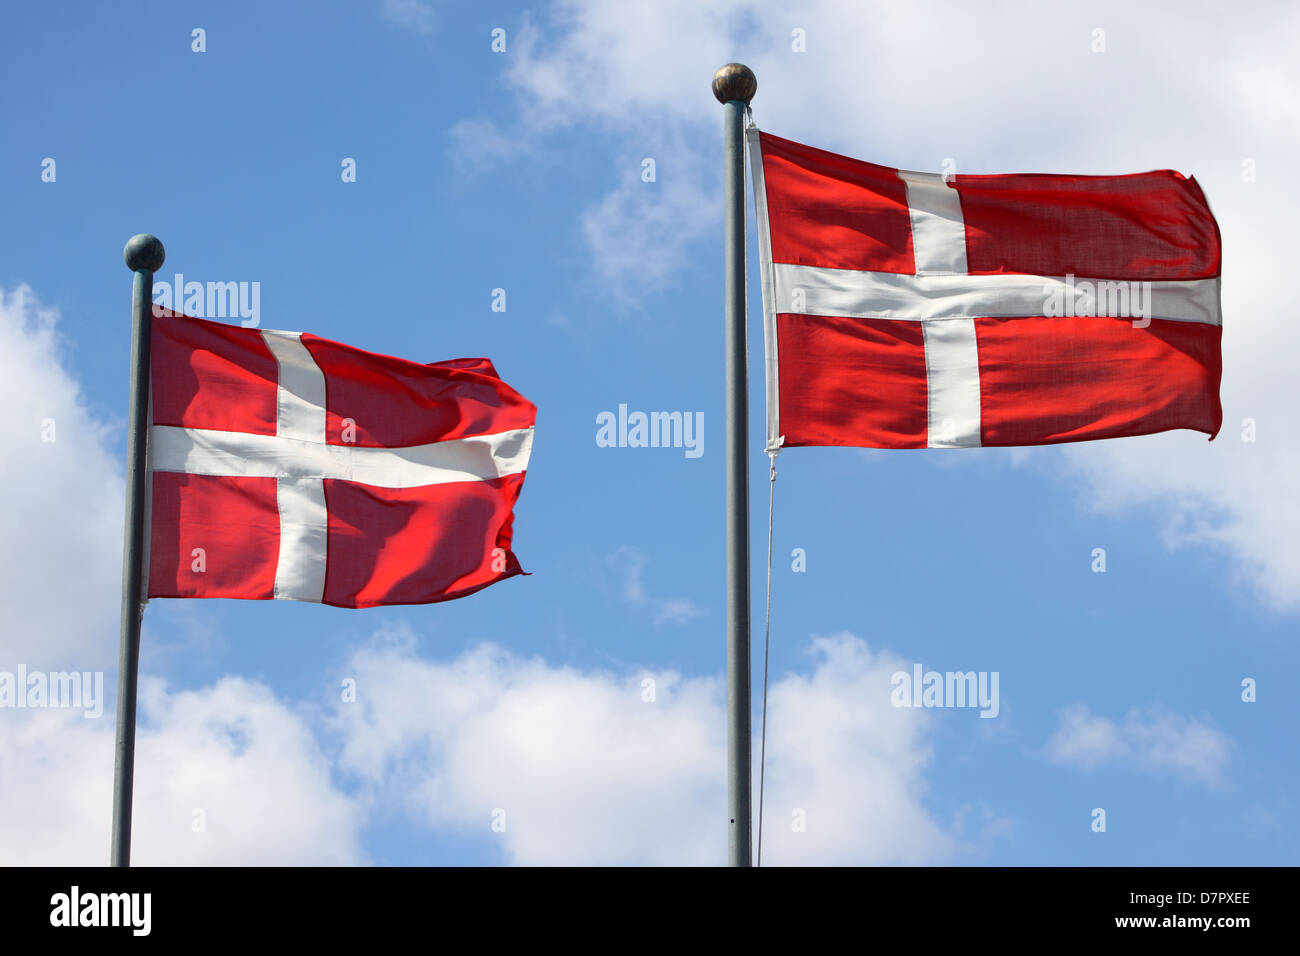 Two Denmark flags waving on wind against the blue sky with clouds Stock Photo